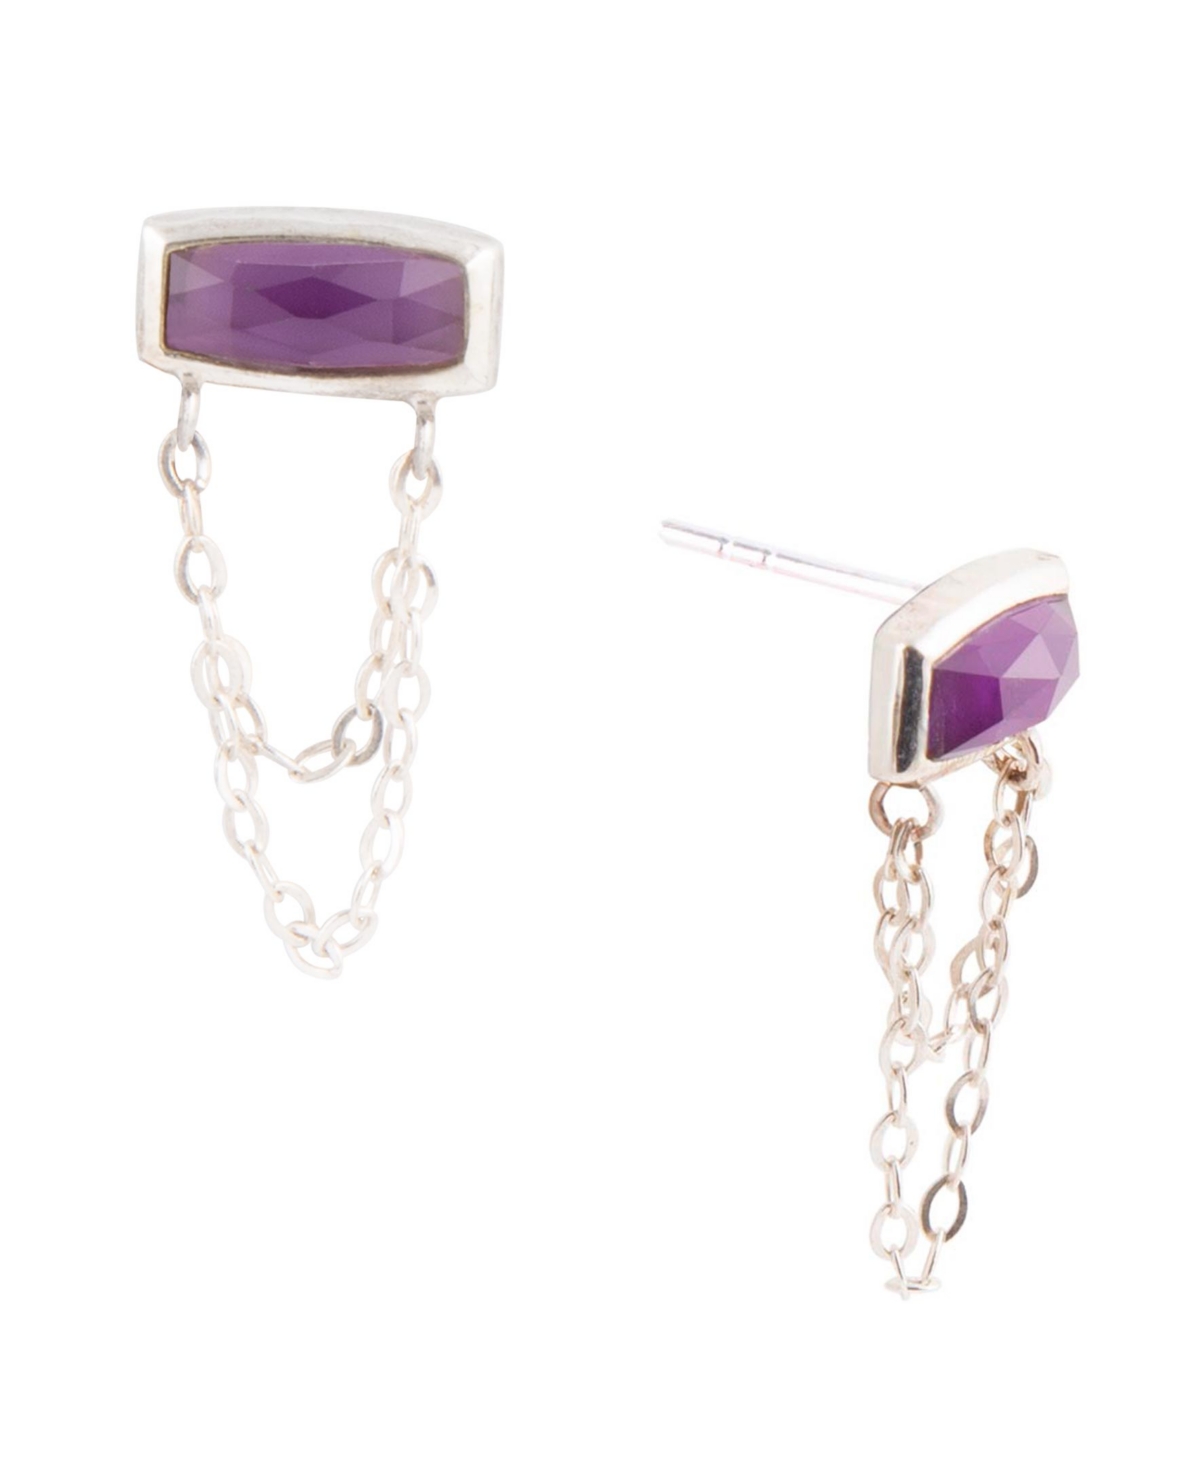 Barse Hammered Genuine Purple Amethyst And Sterling Silver Rectangle Stud Earrings